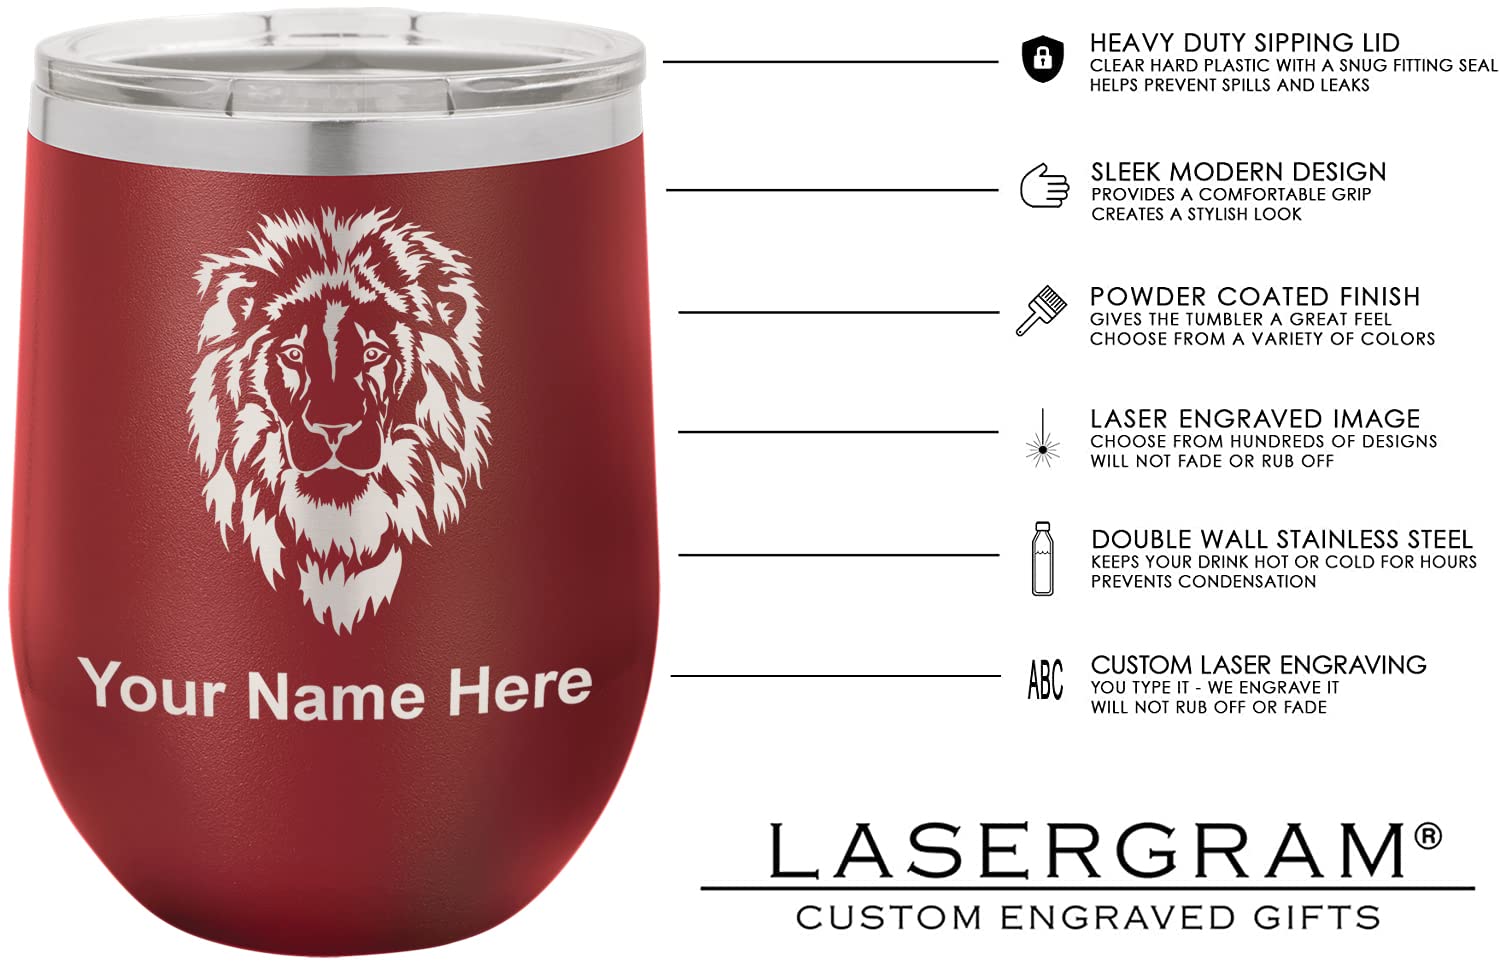 LaserGram Double Wall Stainless Steel Wine Glass Tumbler, Hummingbird, Personalized Engraving Included (Maroon)